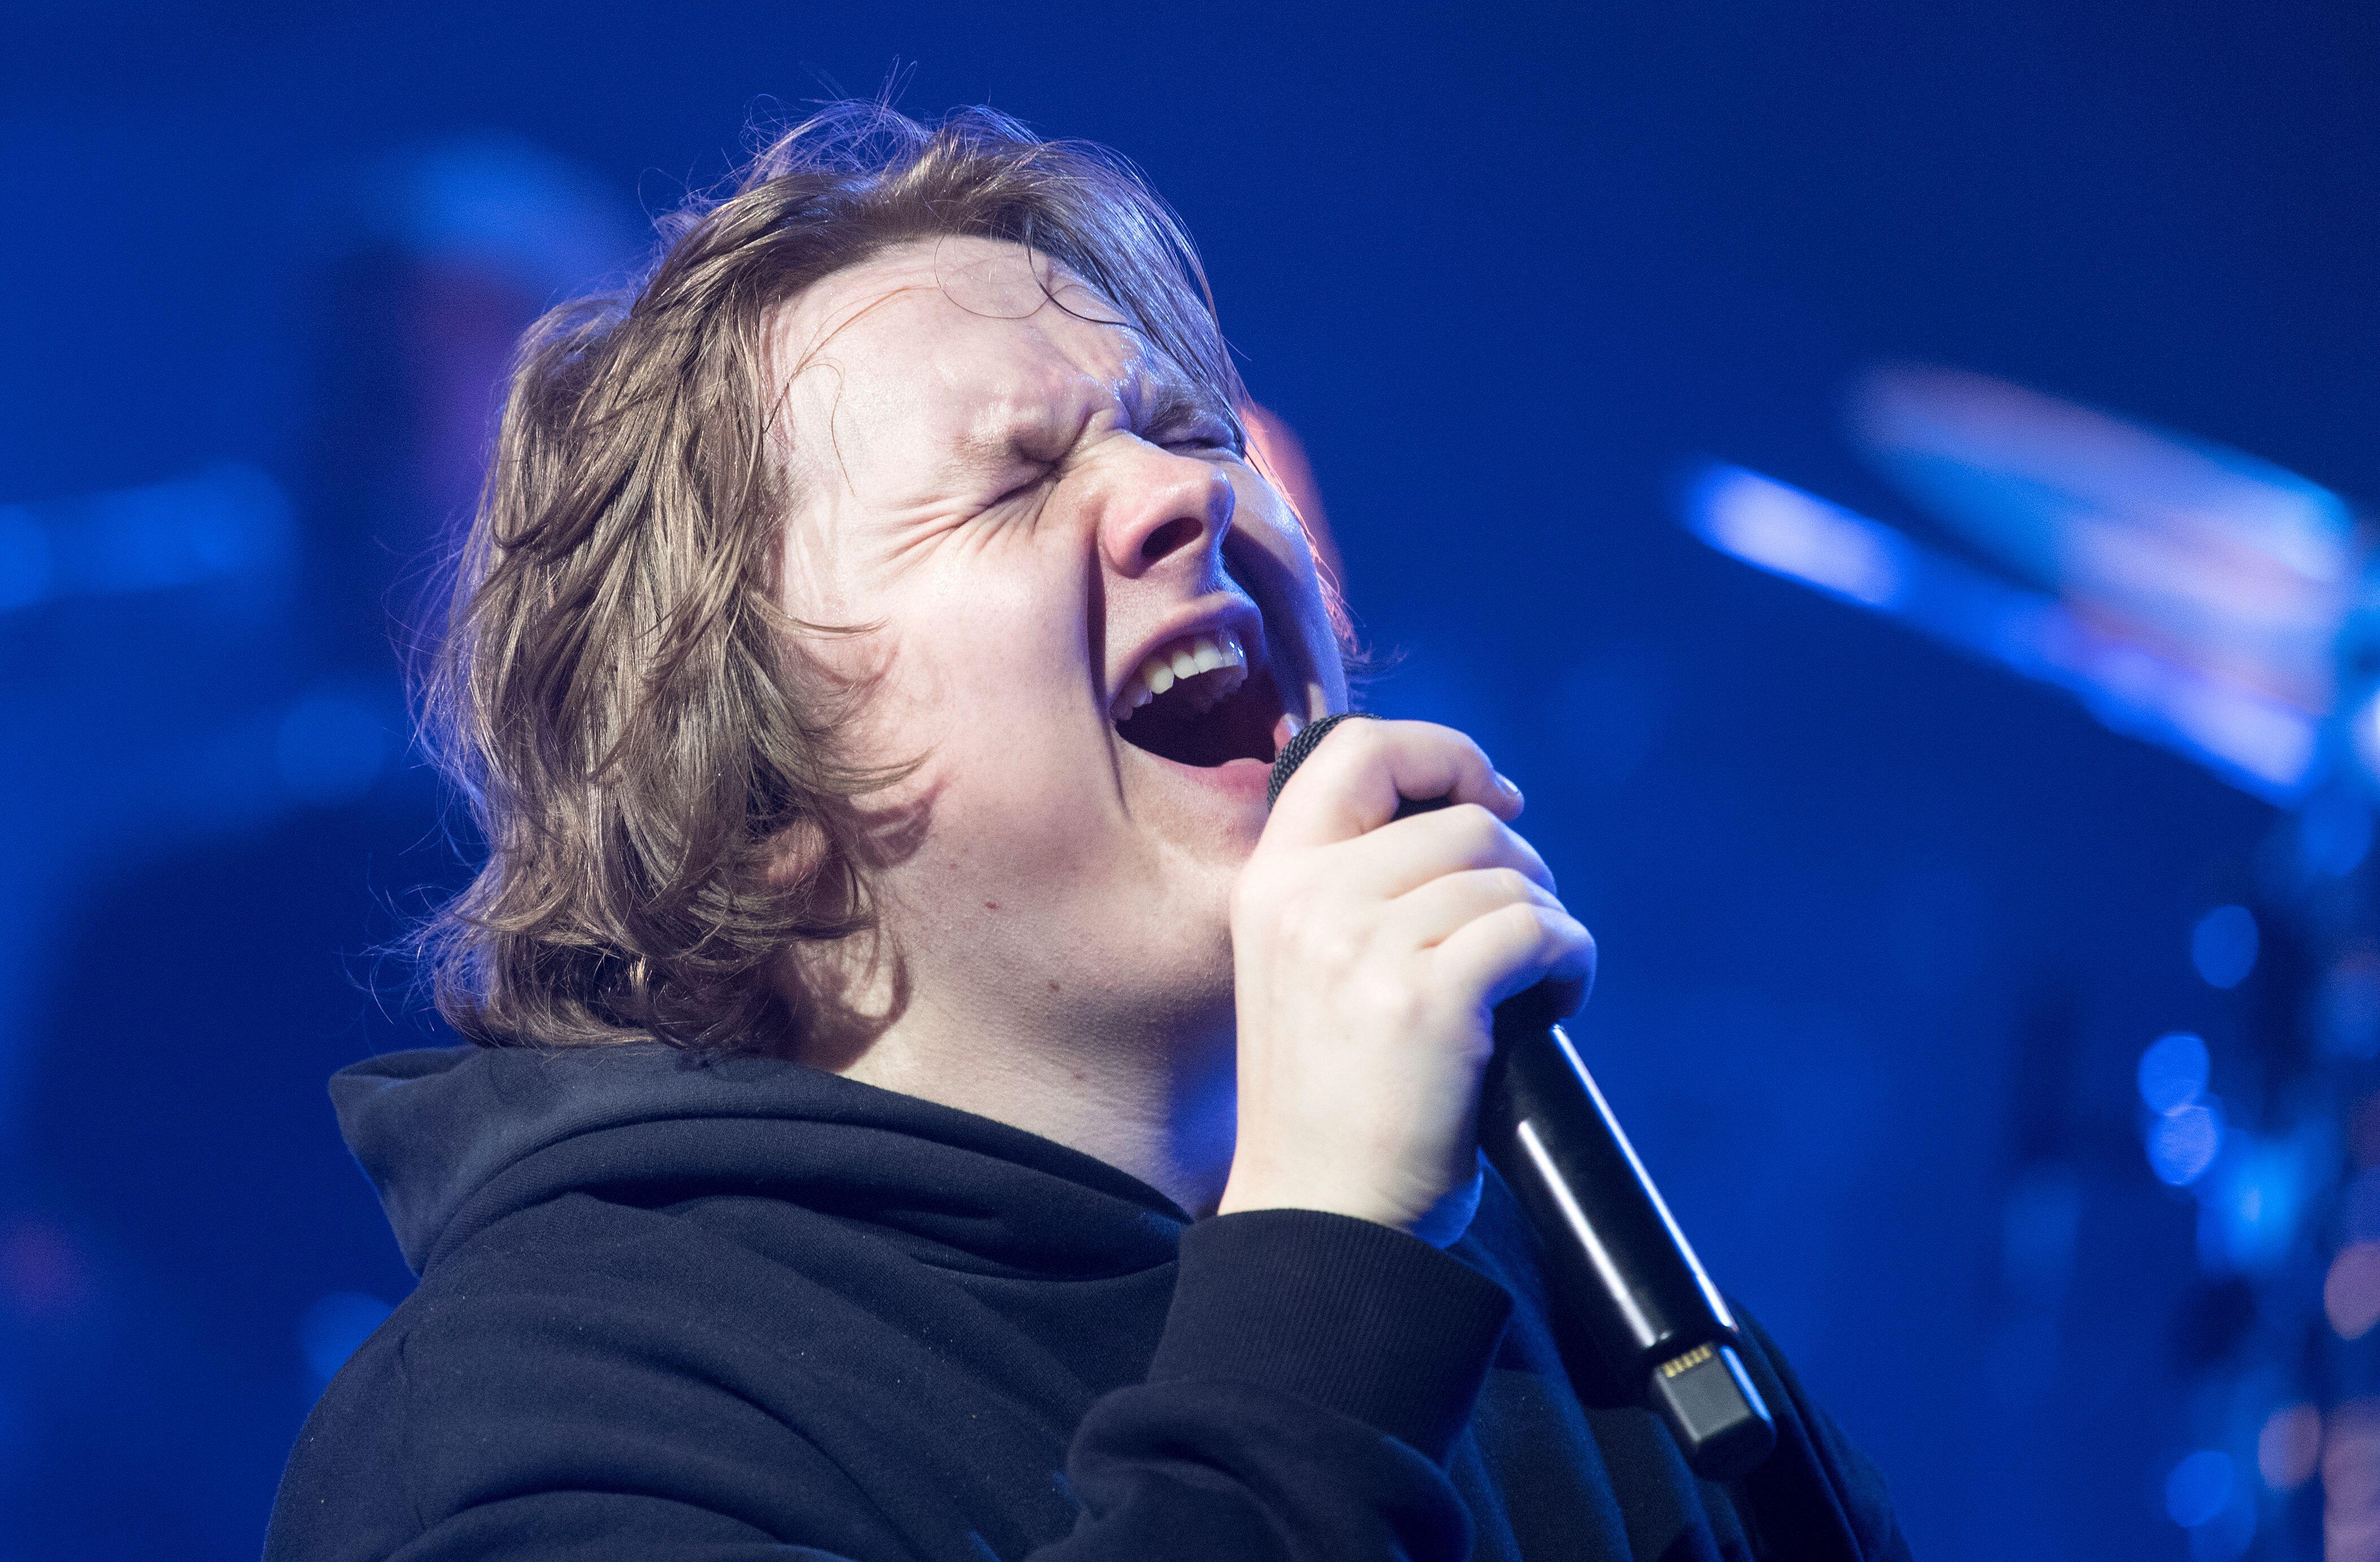 Lewis Capaldi has told of his past year in his new song